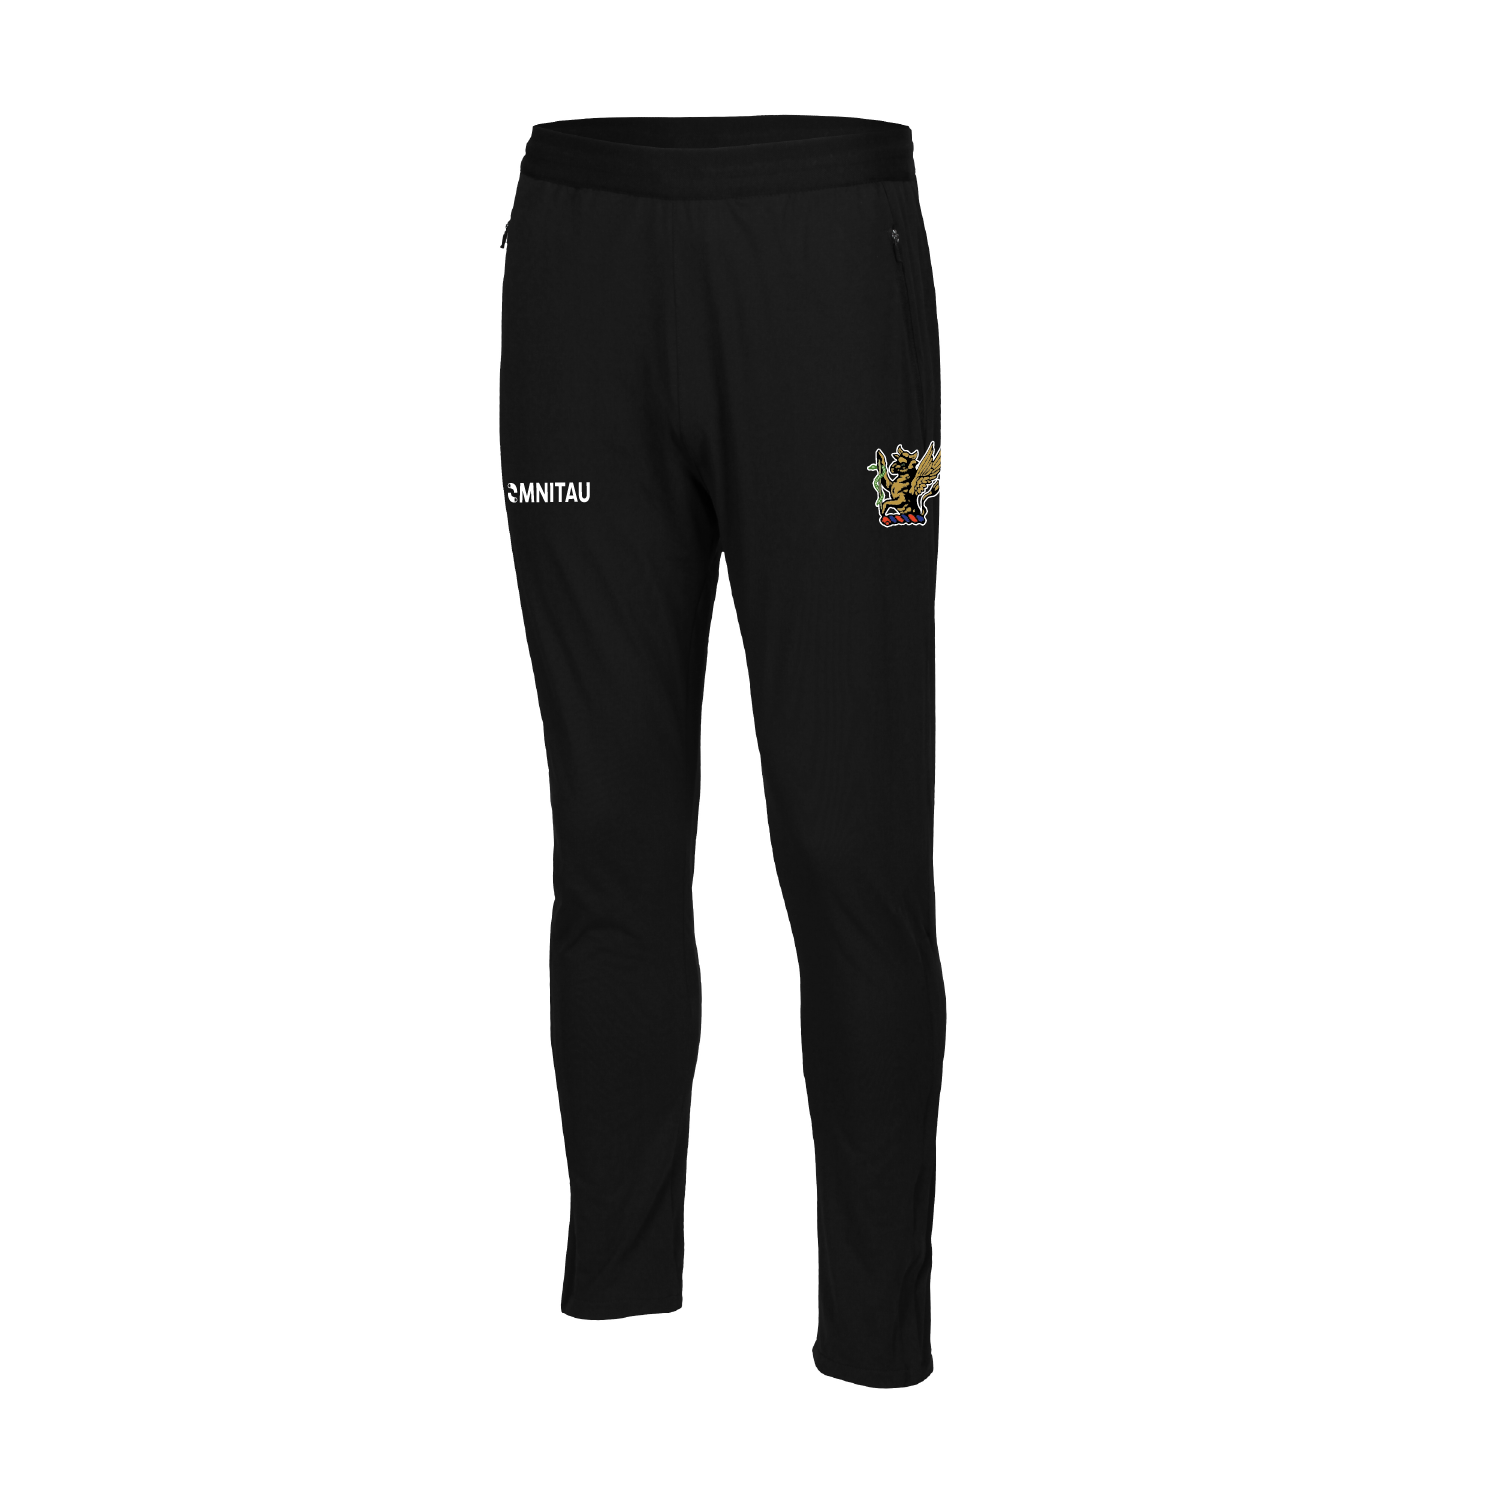 Galenicals FC Team Sports Tapered Track Pants - Black